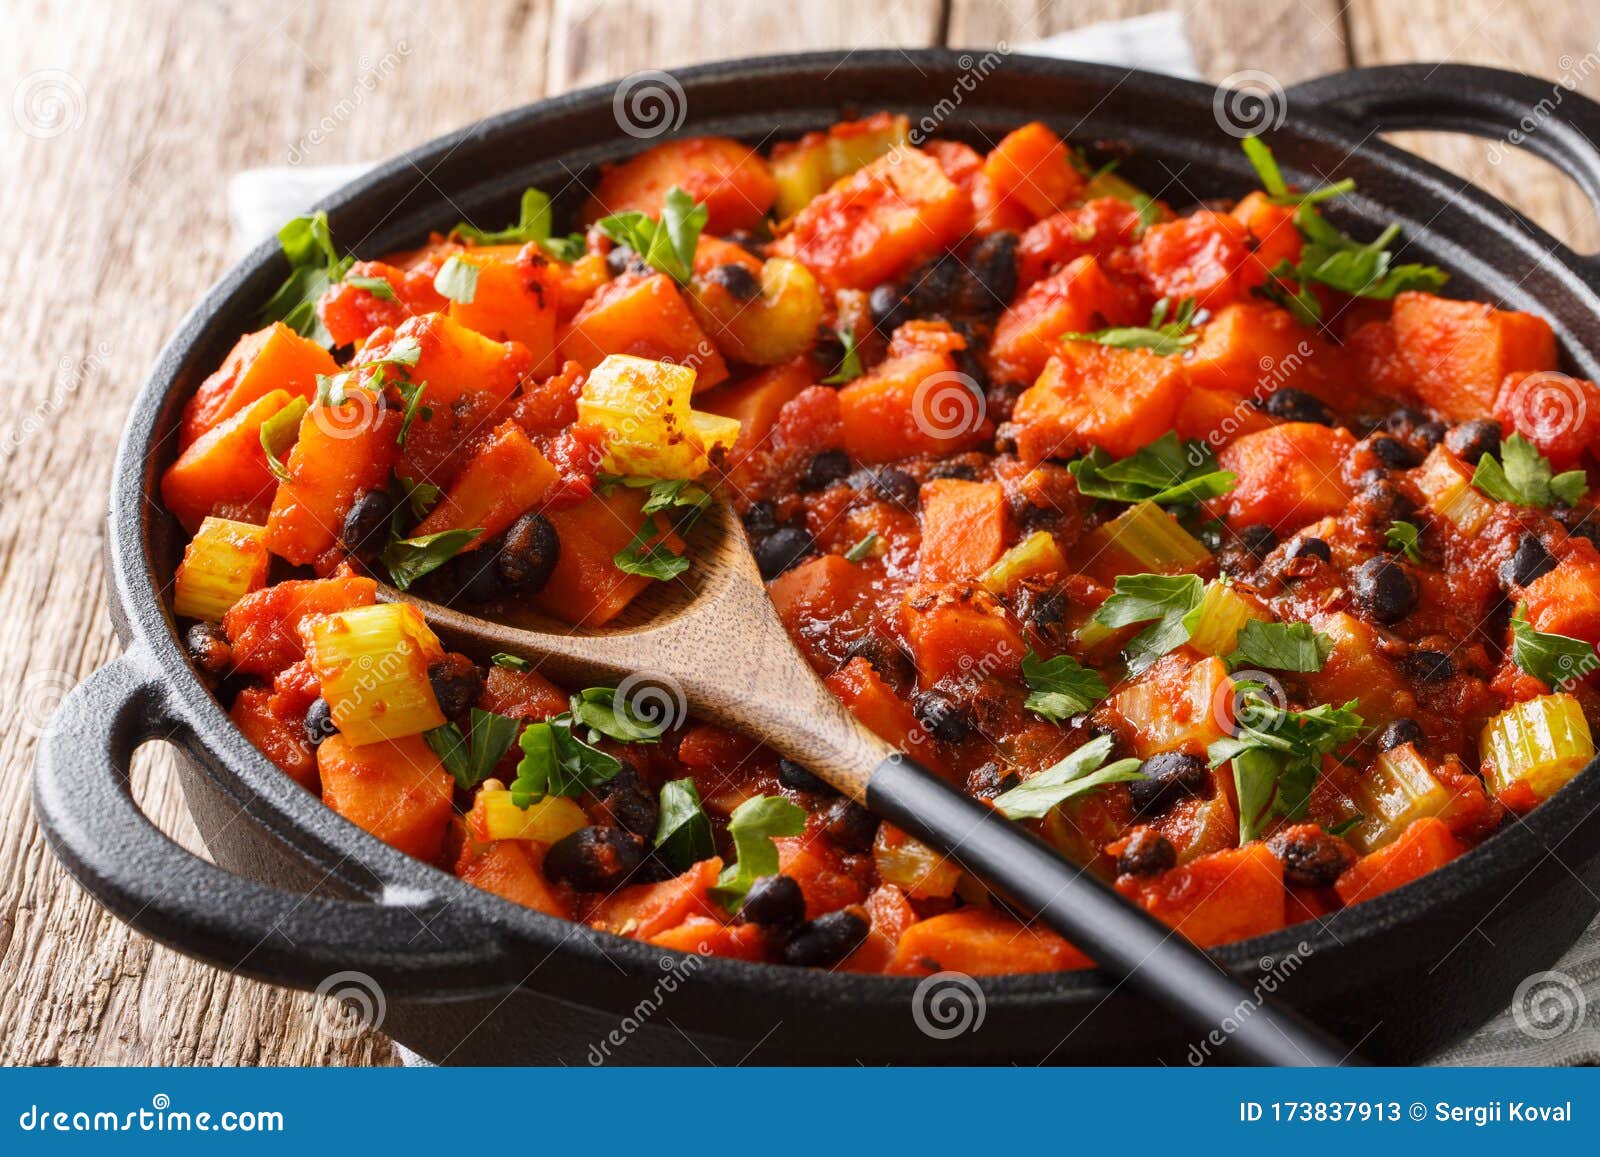 Chili Sweet Potatoes and Black Beans with Tomatoes, Celery Close-up in ...